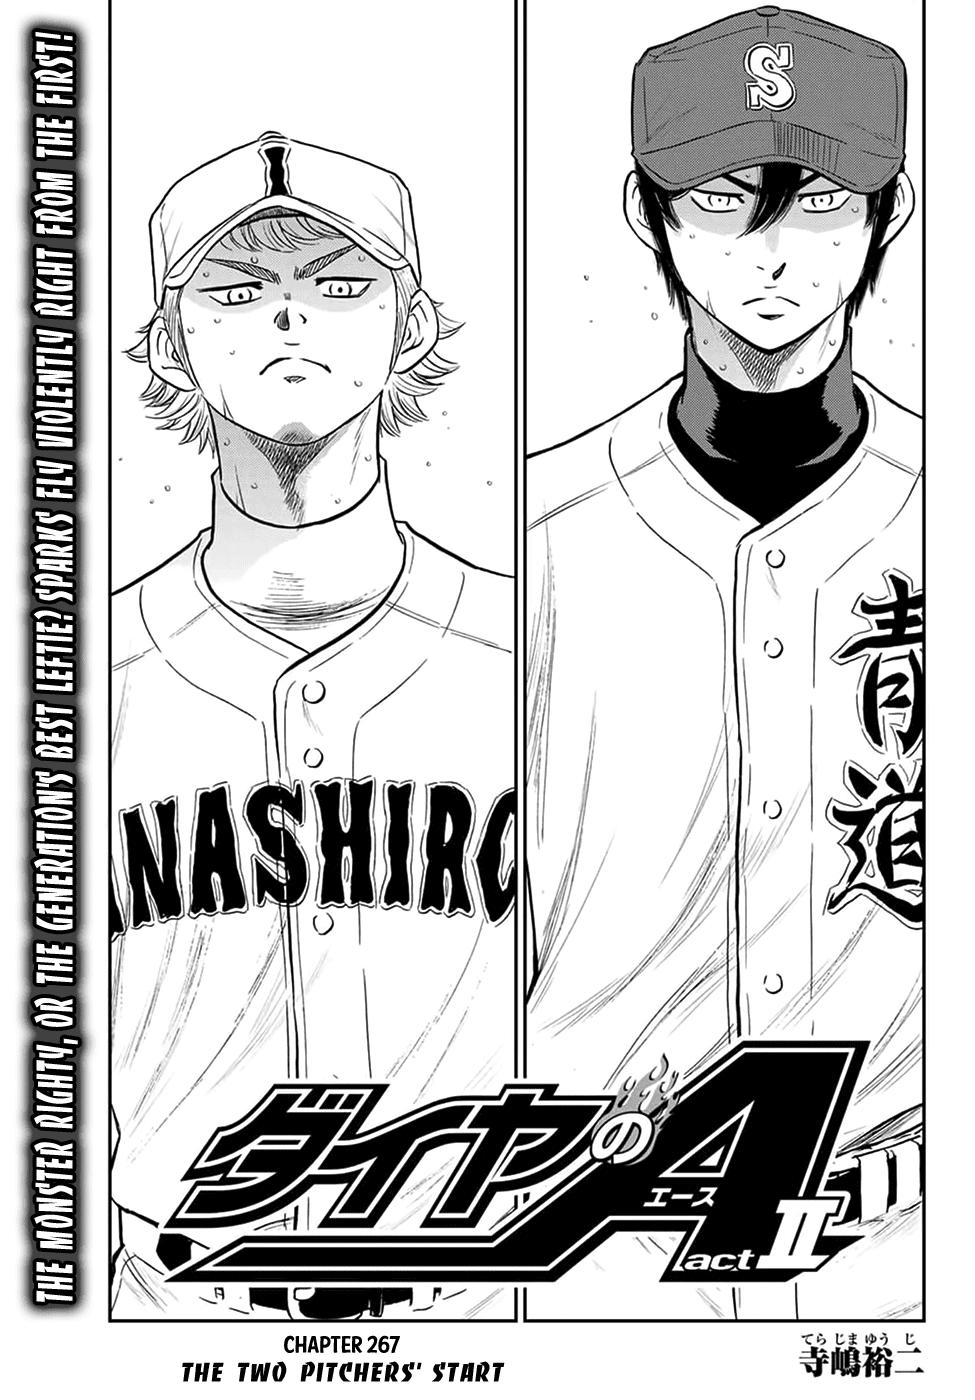 Read Daiya No A - Act Ii Chapter 169: The Focus Of The Gaze